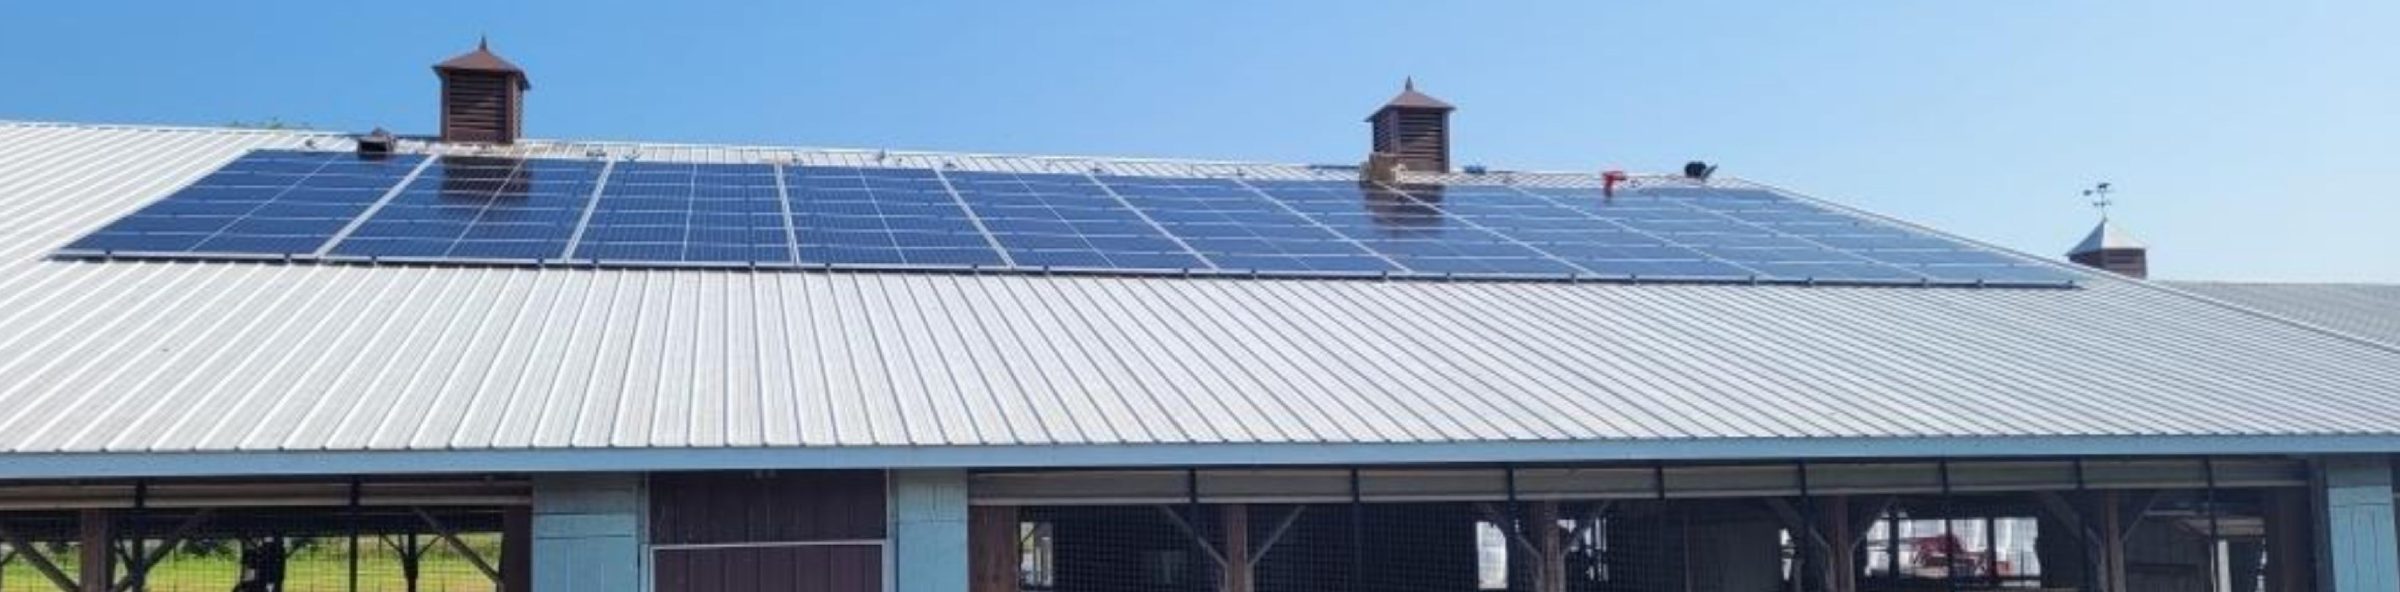 Solar panels installed on a cattle ranch roof.